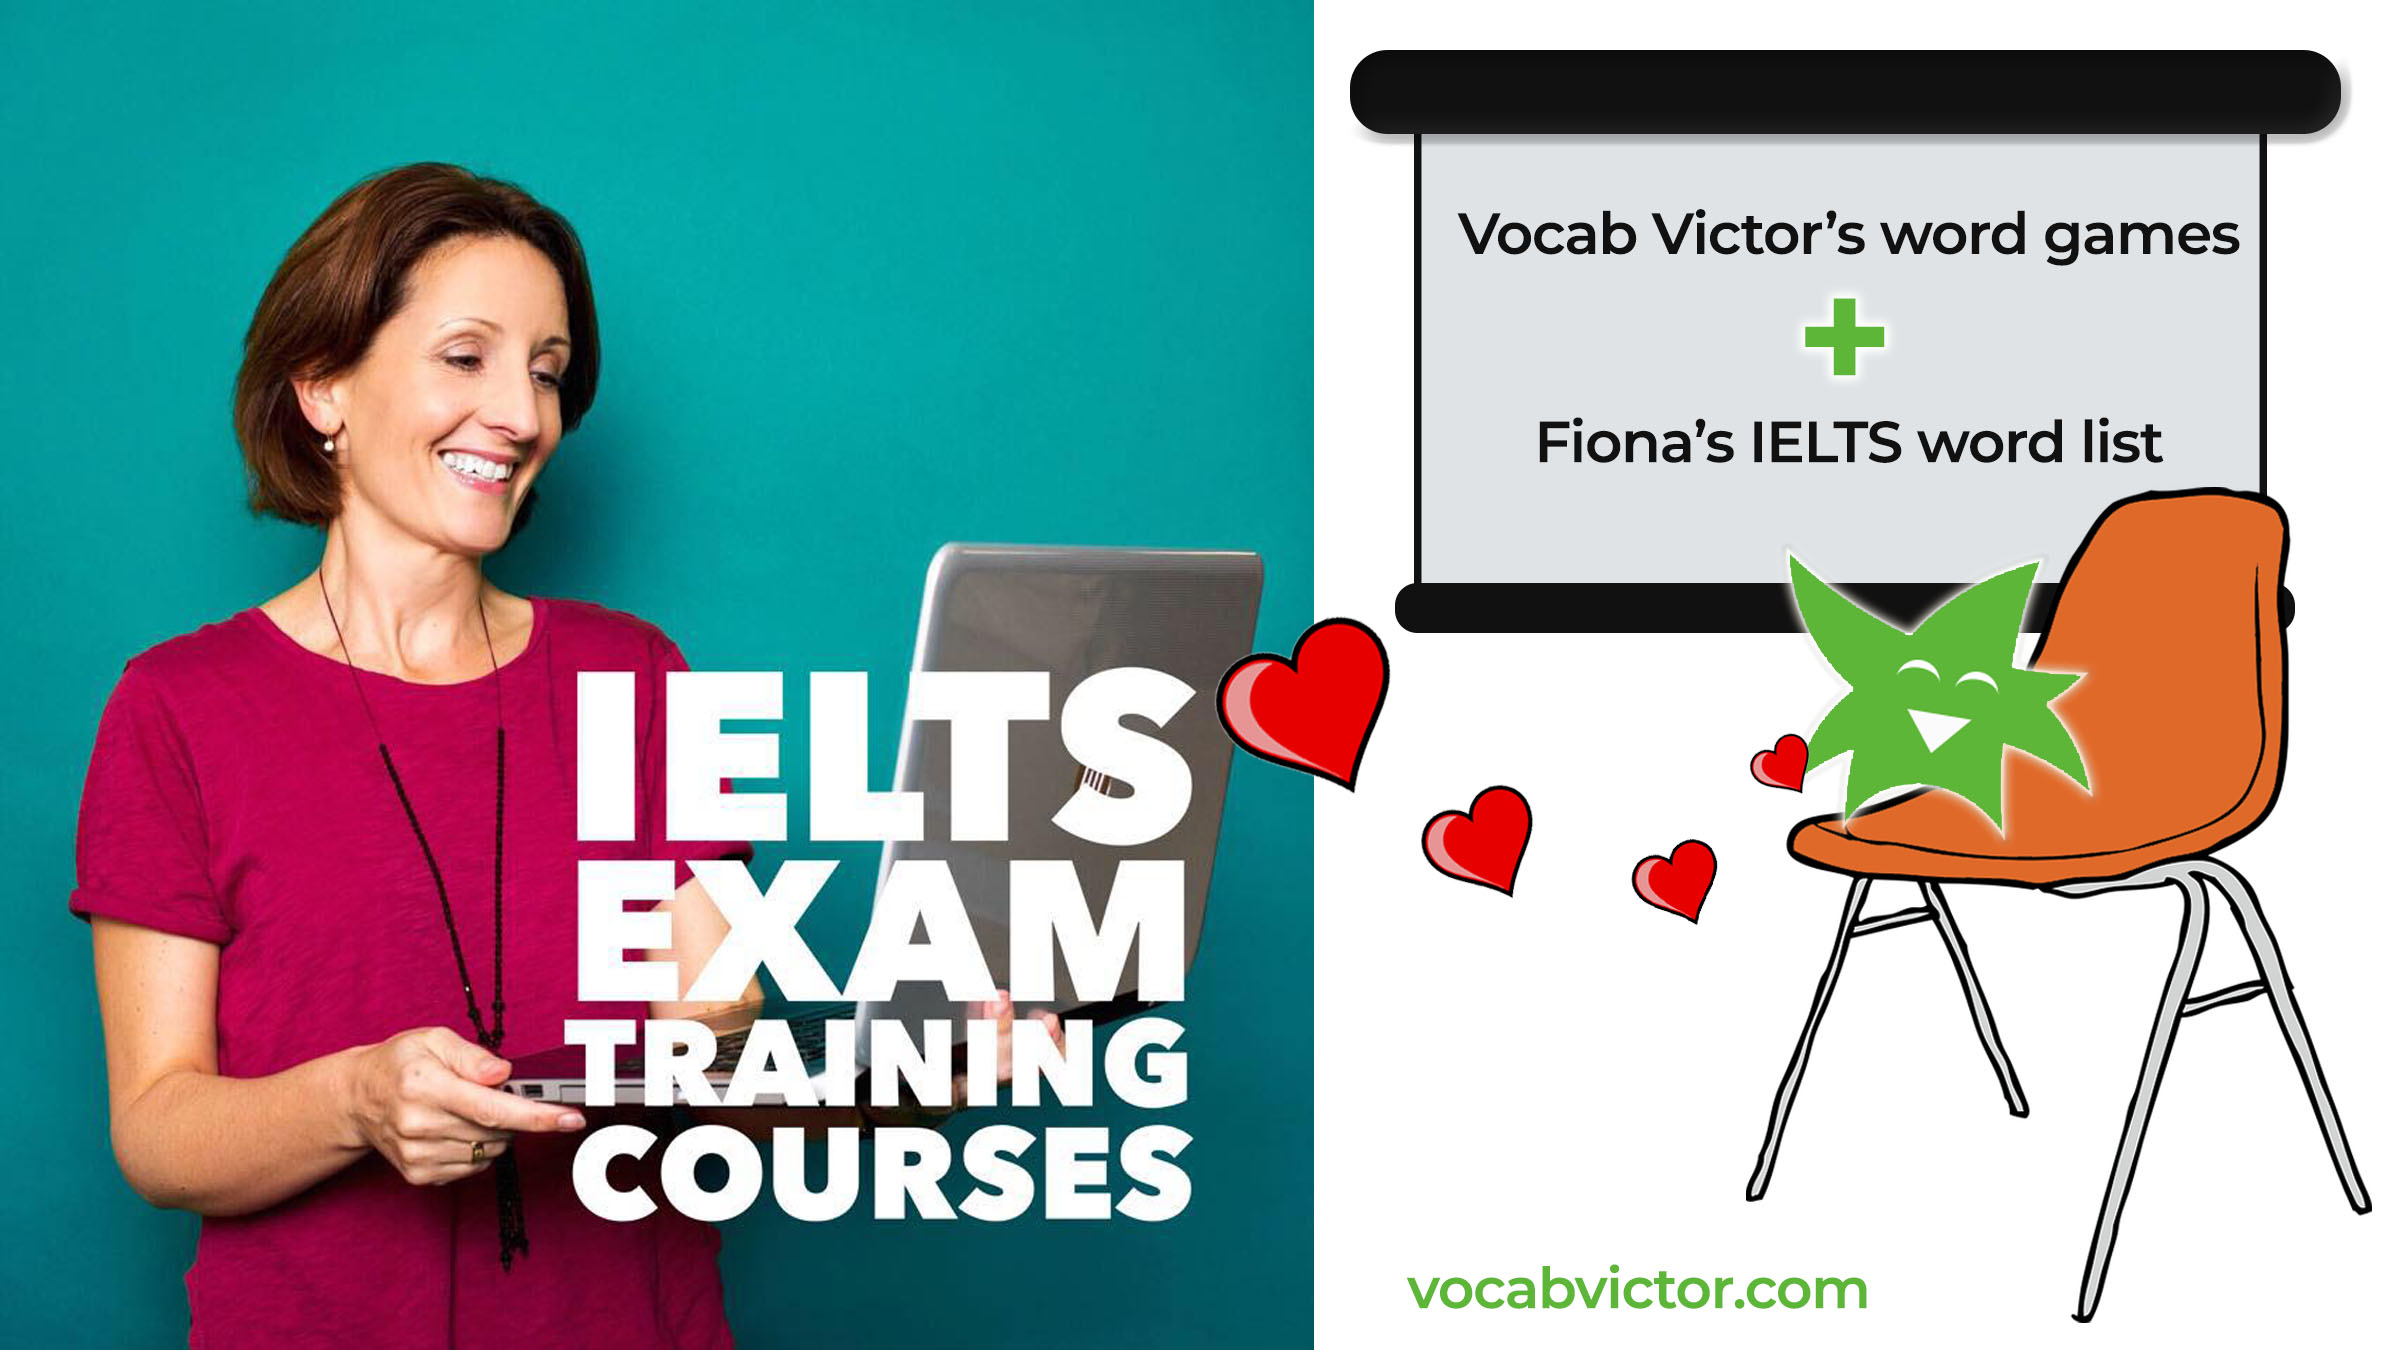 Vocab Victor teams with IELTS with Fiona